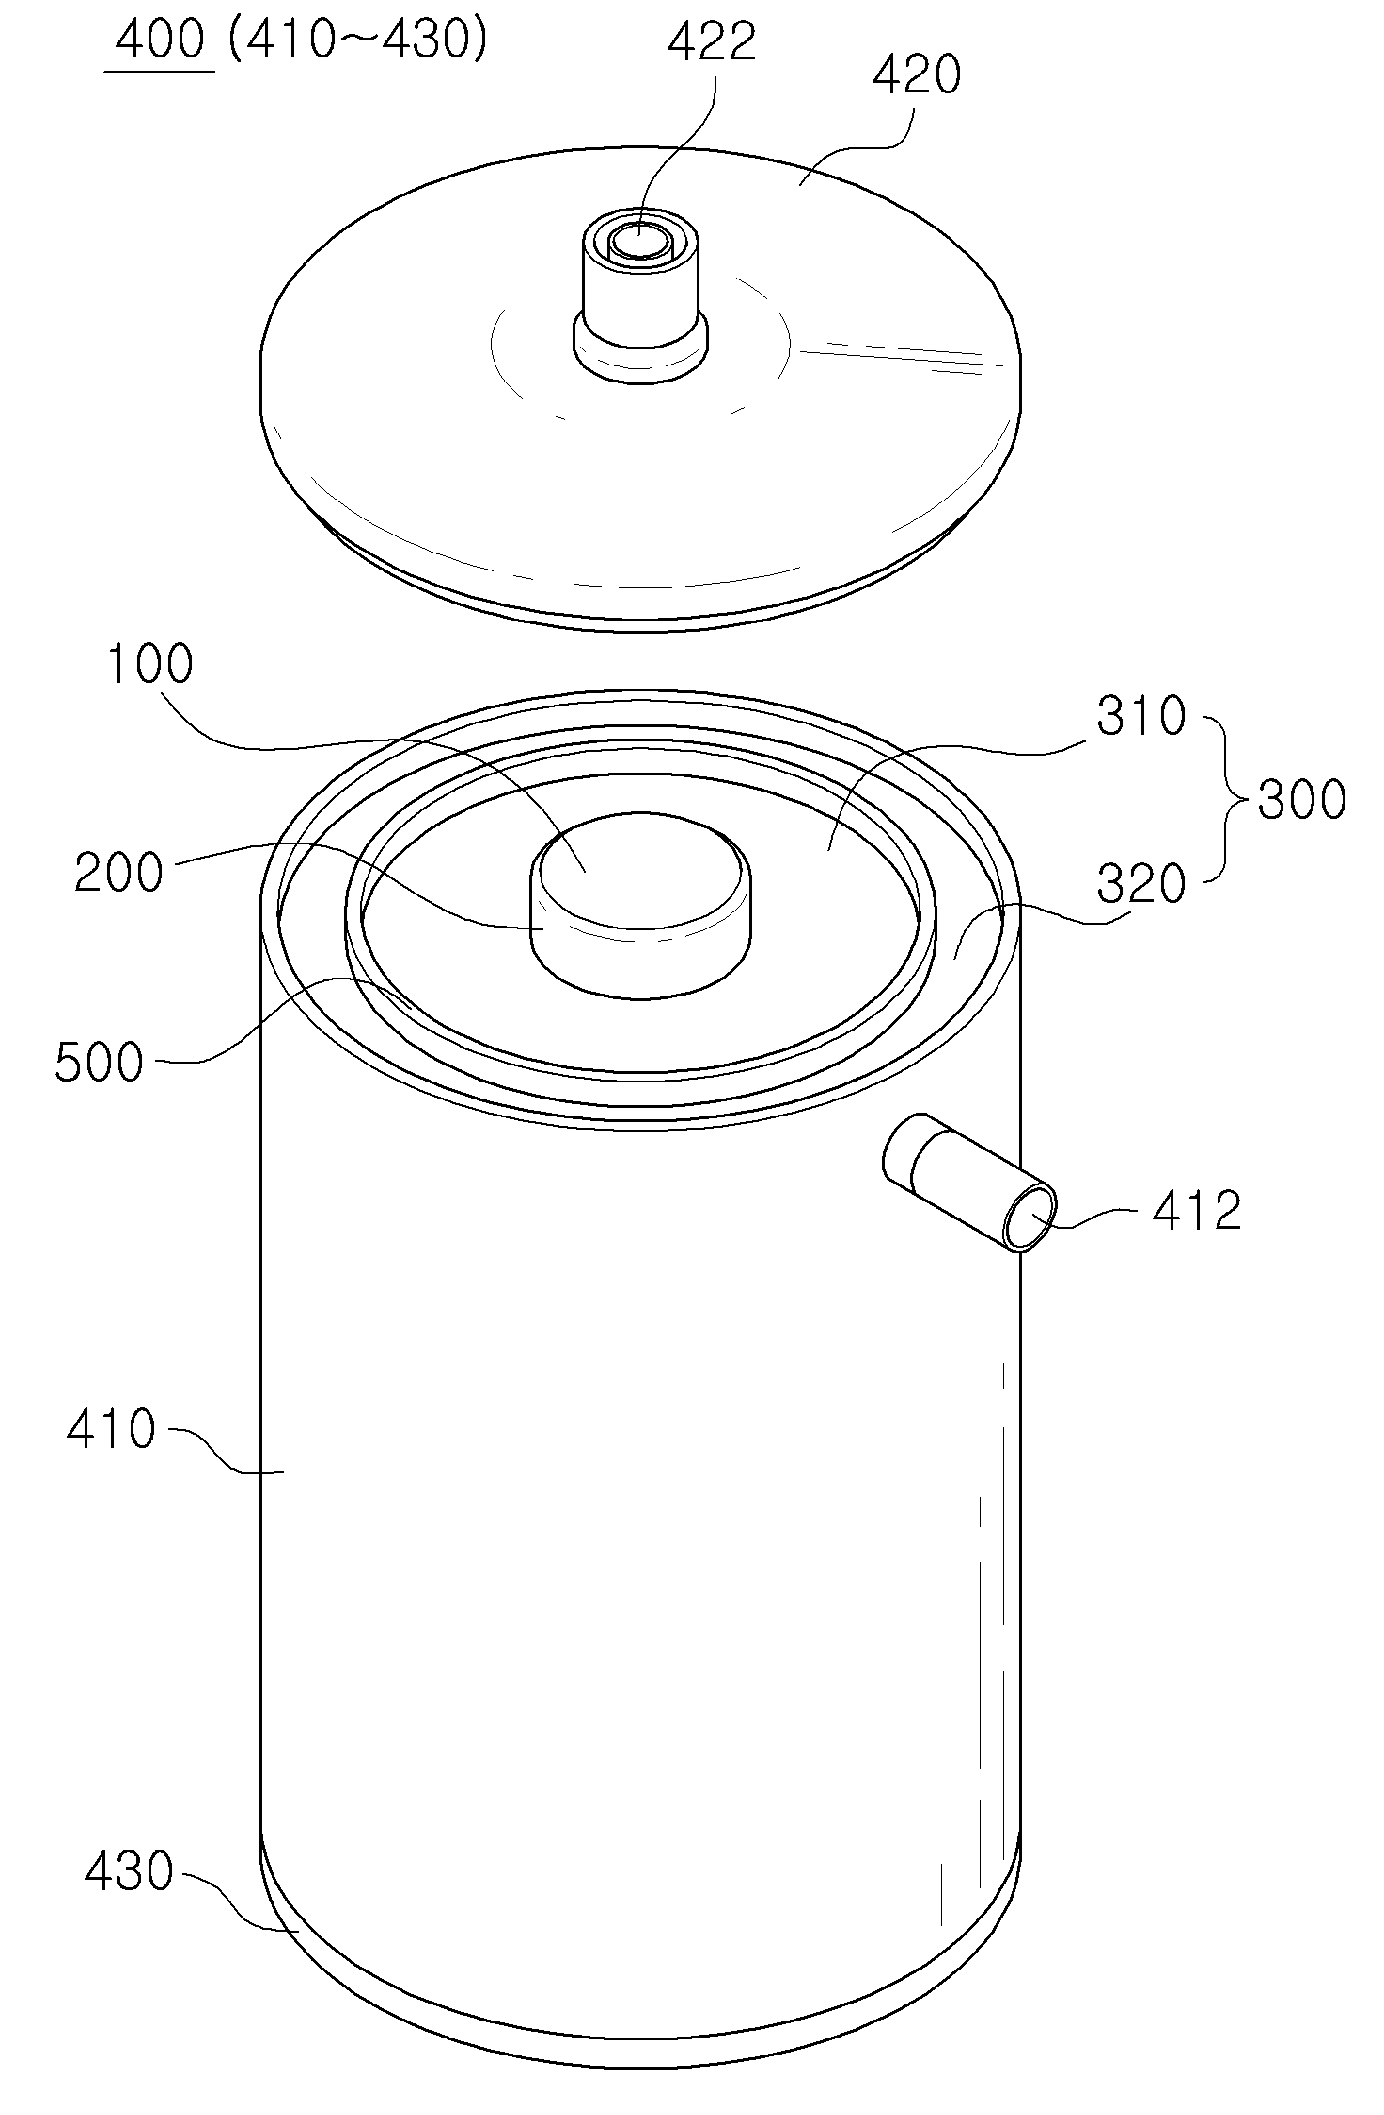 Apparatus for purifying blood